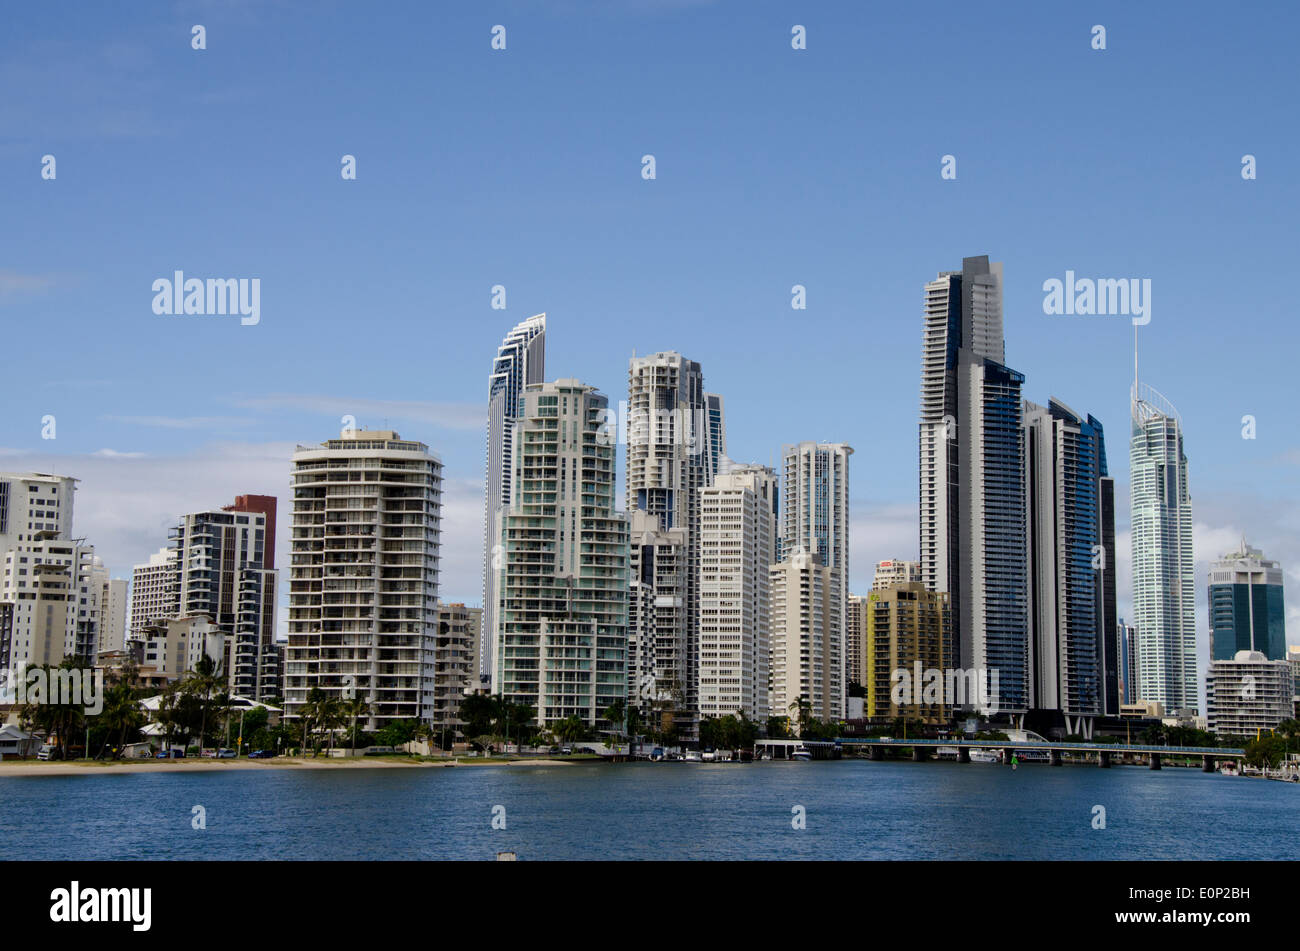 Australia, Queensland, Gold Coast. Waterfront view of Surfers' Paradise skyline. Stock Photo